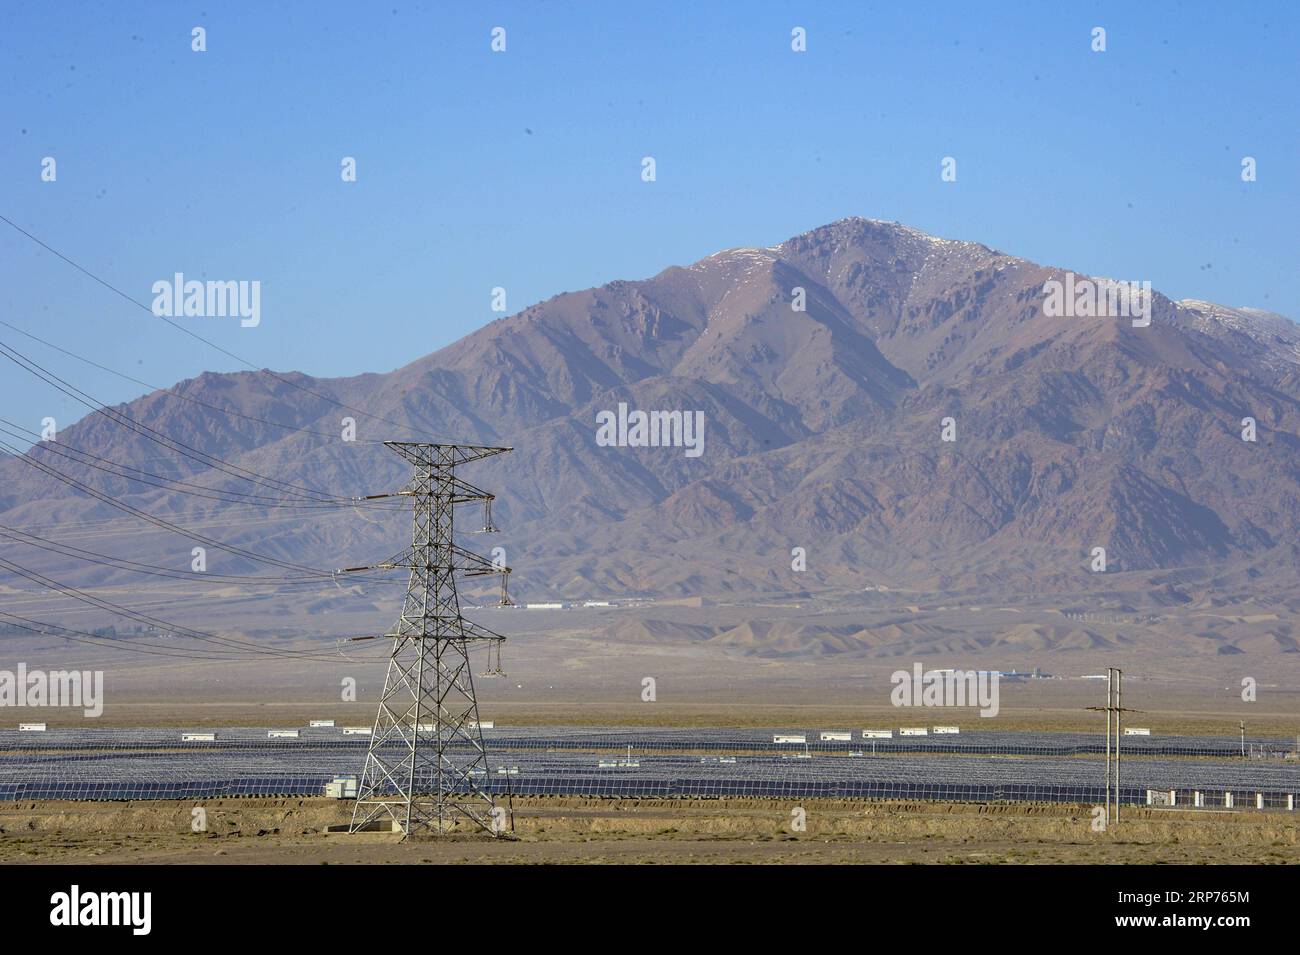 (190129) -- BEIJING, Jan. 29, 2019 (Xinhua) -- Photo taken on Sept. 20, 2018 shows a photovoltaic power plant in Hami, northwest China s Xinjiang Uygur Autonomous Region. New energy power generation saw double digit growth last year in northwest China s Xinjiang Uygur Autonomous Region amid efforts to reduce coal consumption to improve the energy mix. Wind and solar power generation rose 15.2 percent and 13.6 percent to 36 billion kwh and 11.7 billion kwh respectively, according to the regional development and reform commission. It said 22.9 percent of installed wind power generating capacity Stock Photo